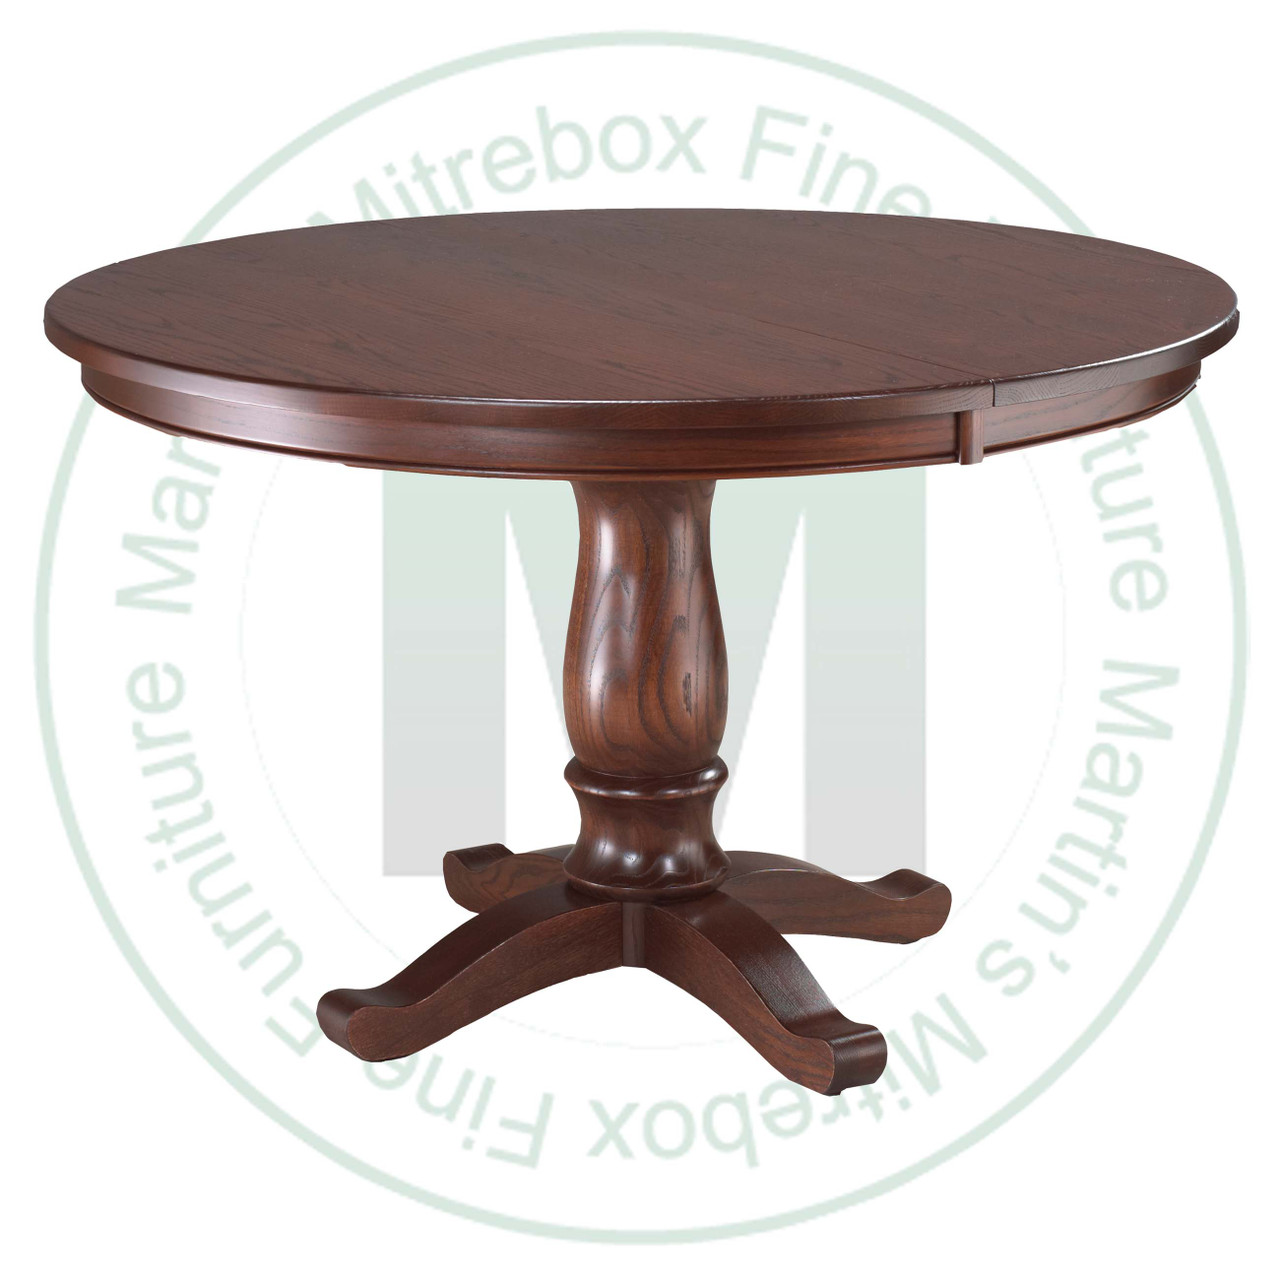 Oak Kimberly Crest Single Pedestal Table 36''D x 36''W x 30''H Round Solid Table